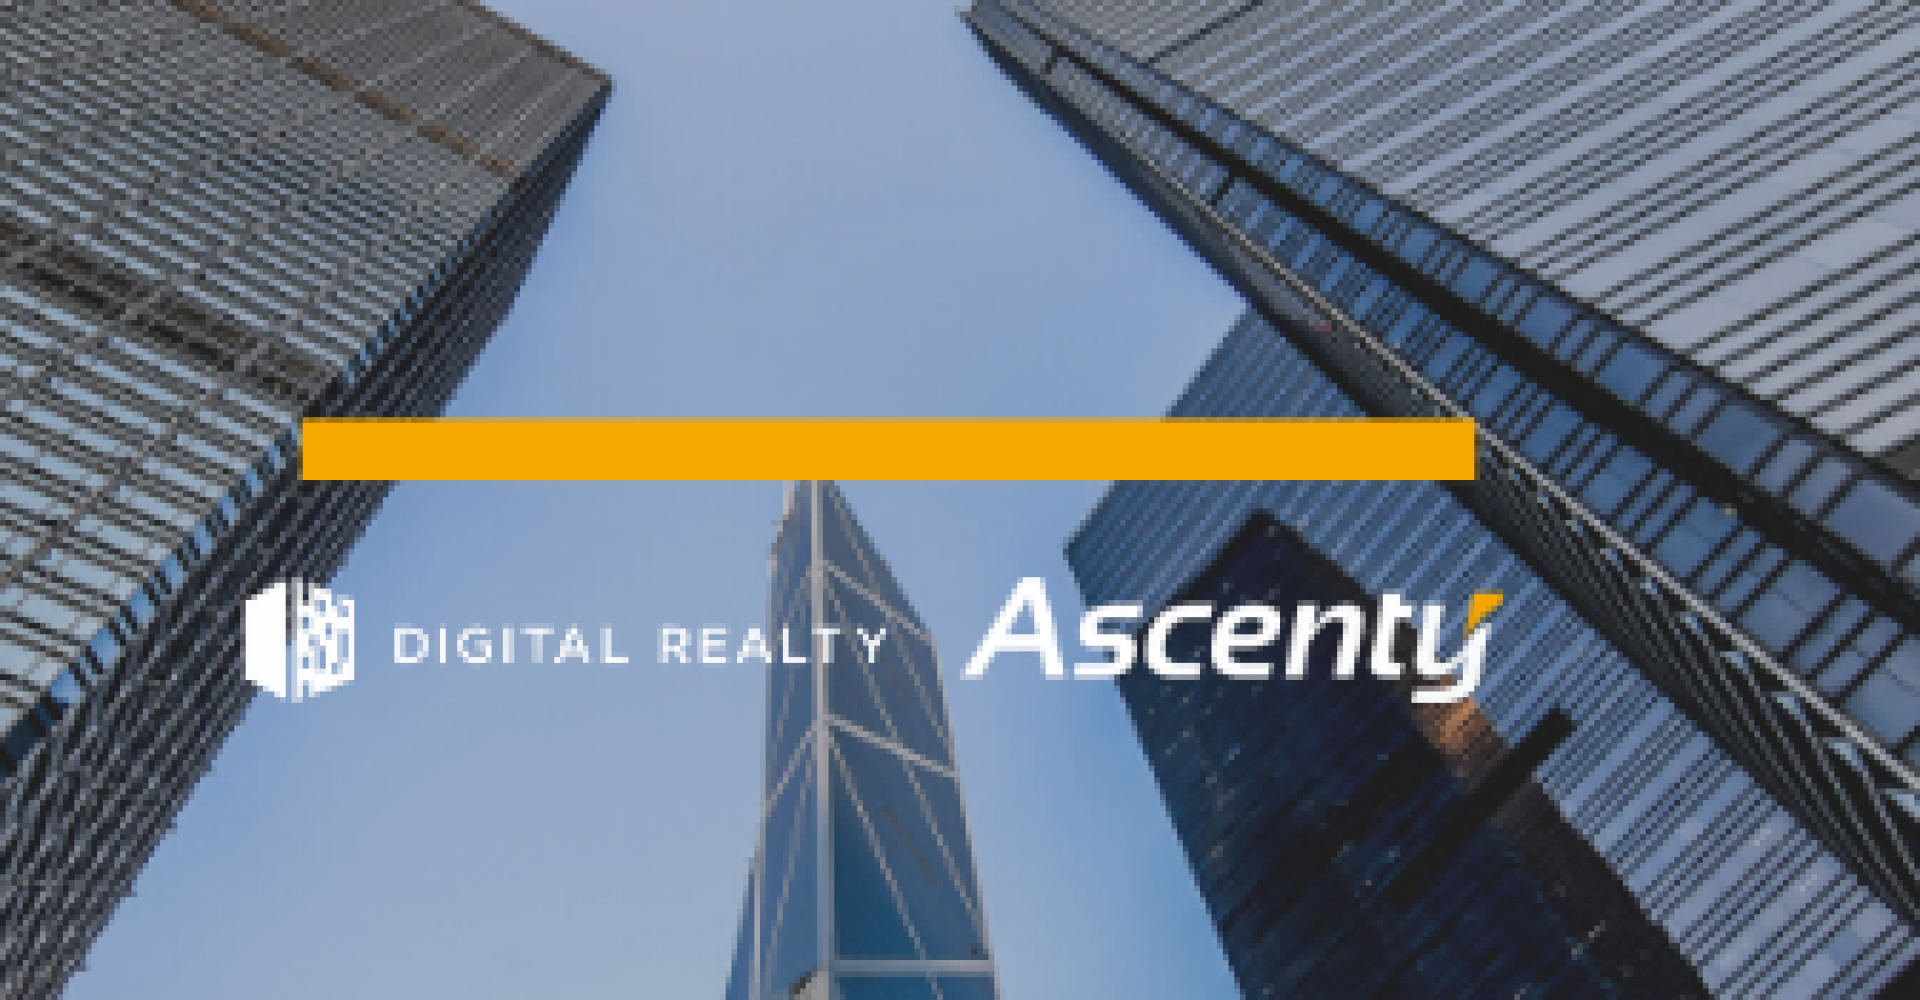 Ascenty and Digital Realty spearhead Colocation infrastructure worldwide after acquiring InterXion for $ 8.4 billion